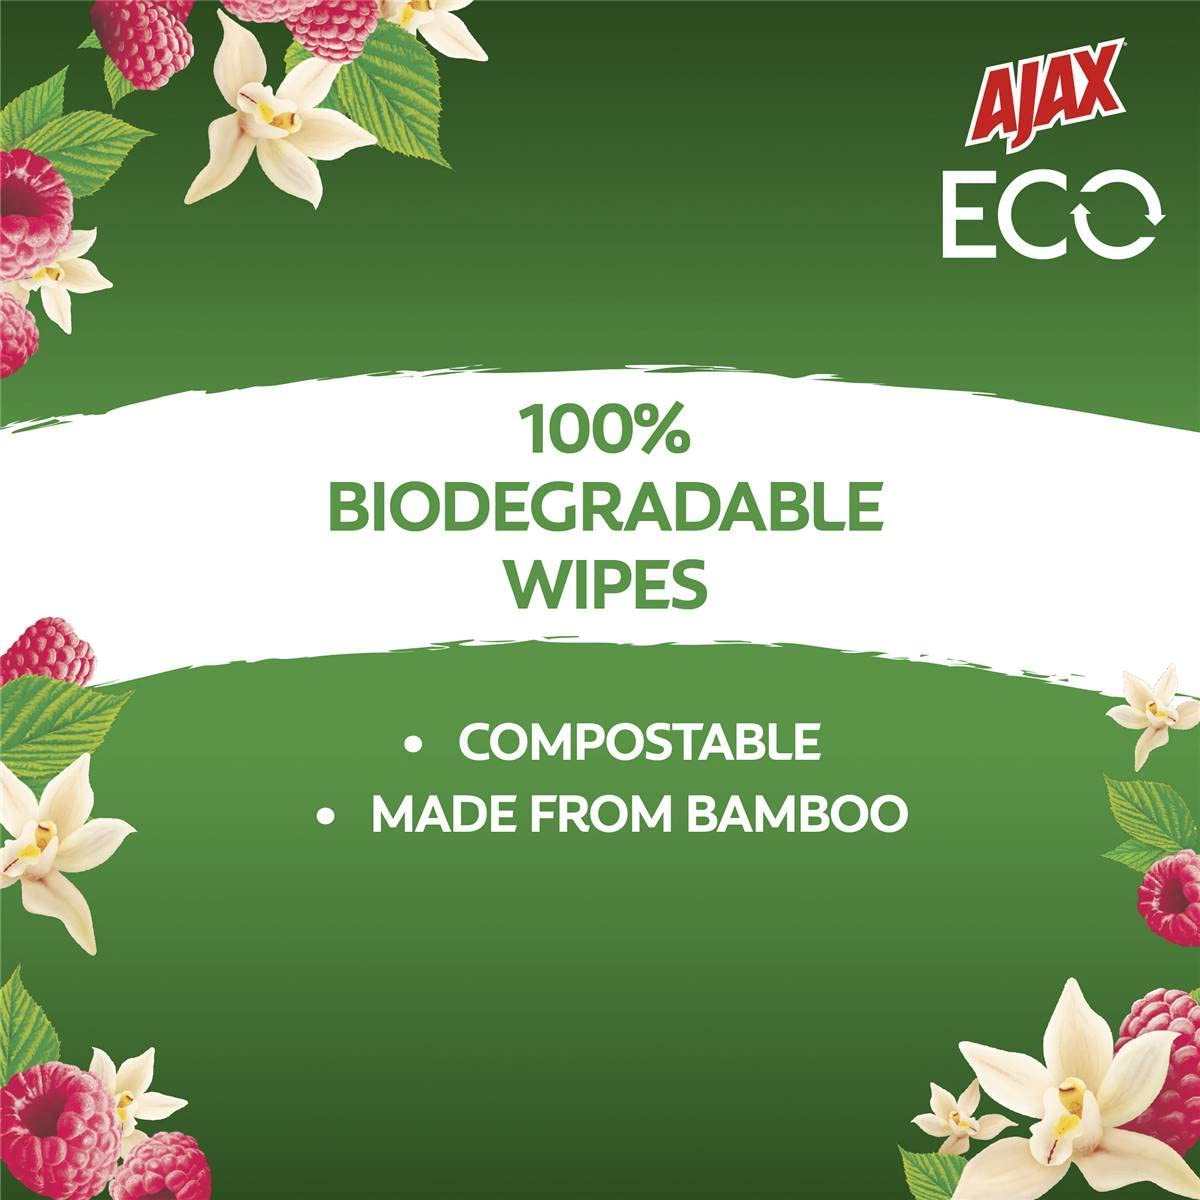 Ajax Eco Antibacterial Disinfectant Surface Cleaning Wipes, Bulk 220 Pack